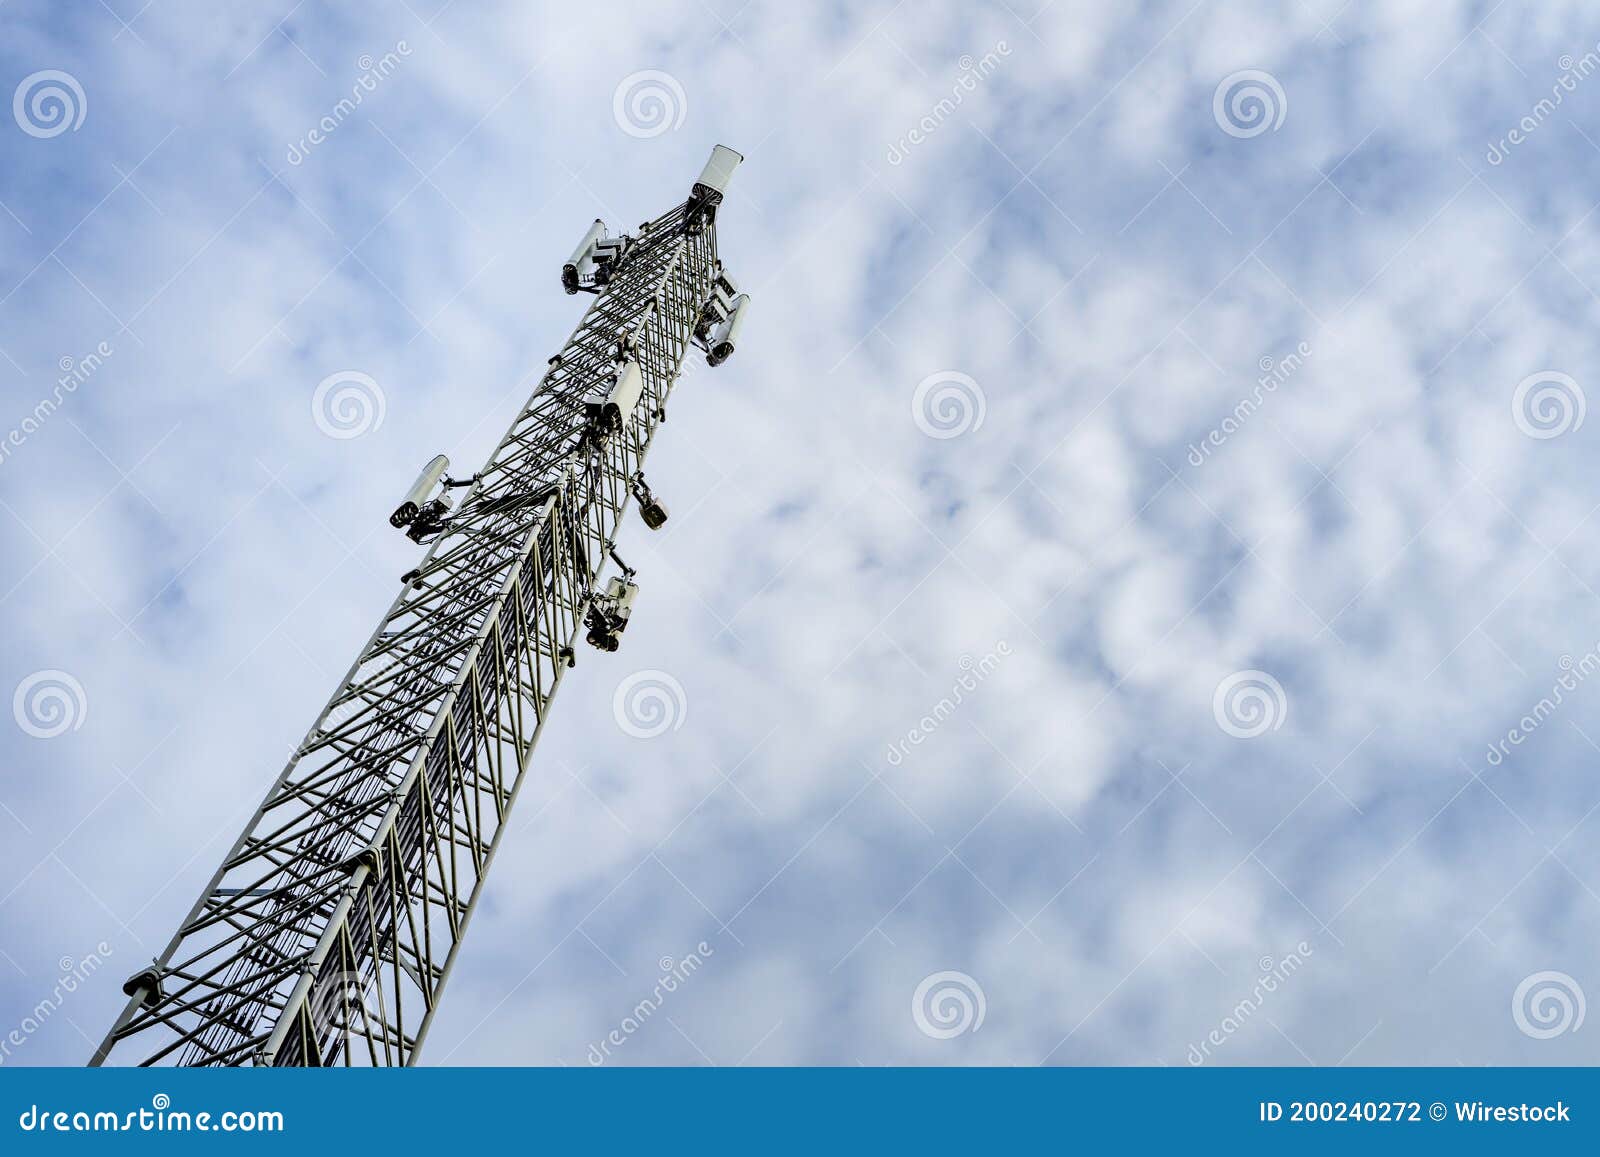 low angle shot of 5g tower